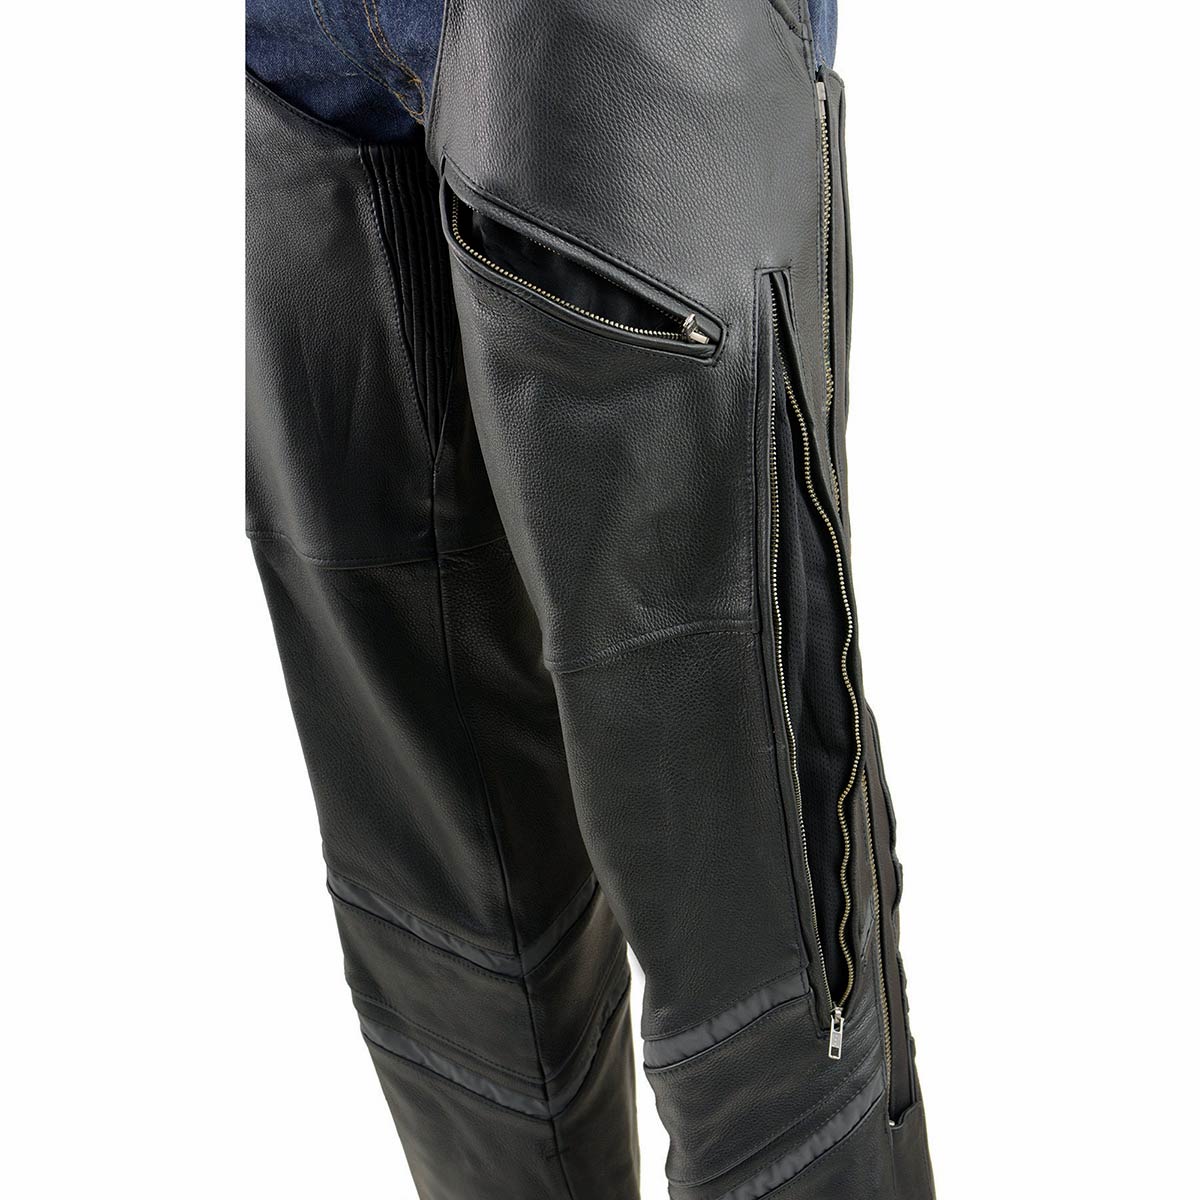 Milwaukee Leather Chaps for Men's Black Vented Naked Leather - Reflective Piping 5 Pockets Motorcycle Chap - ML1144